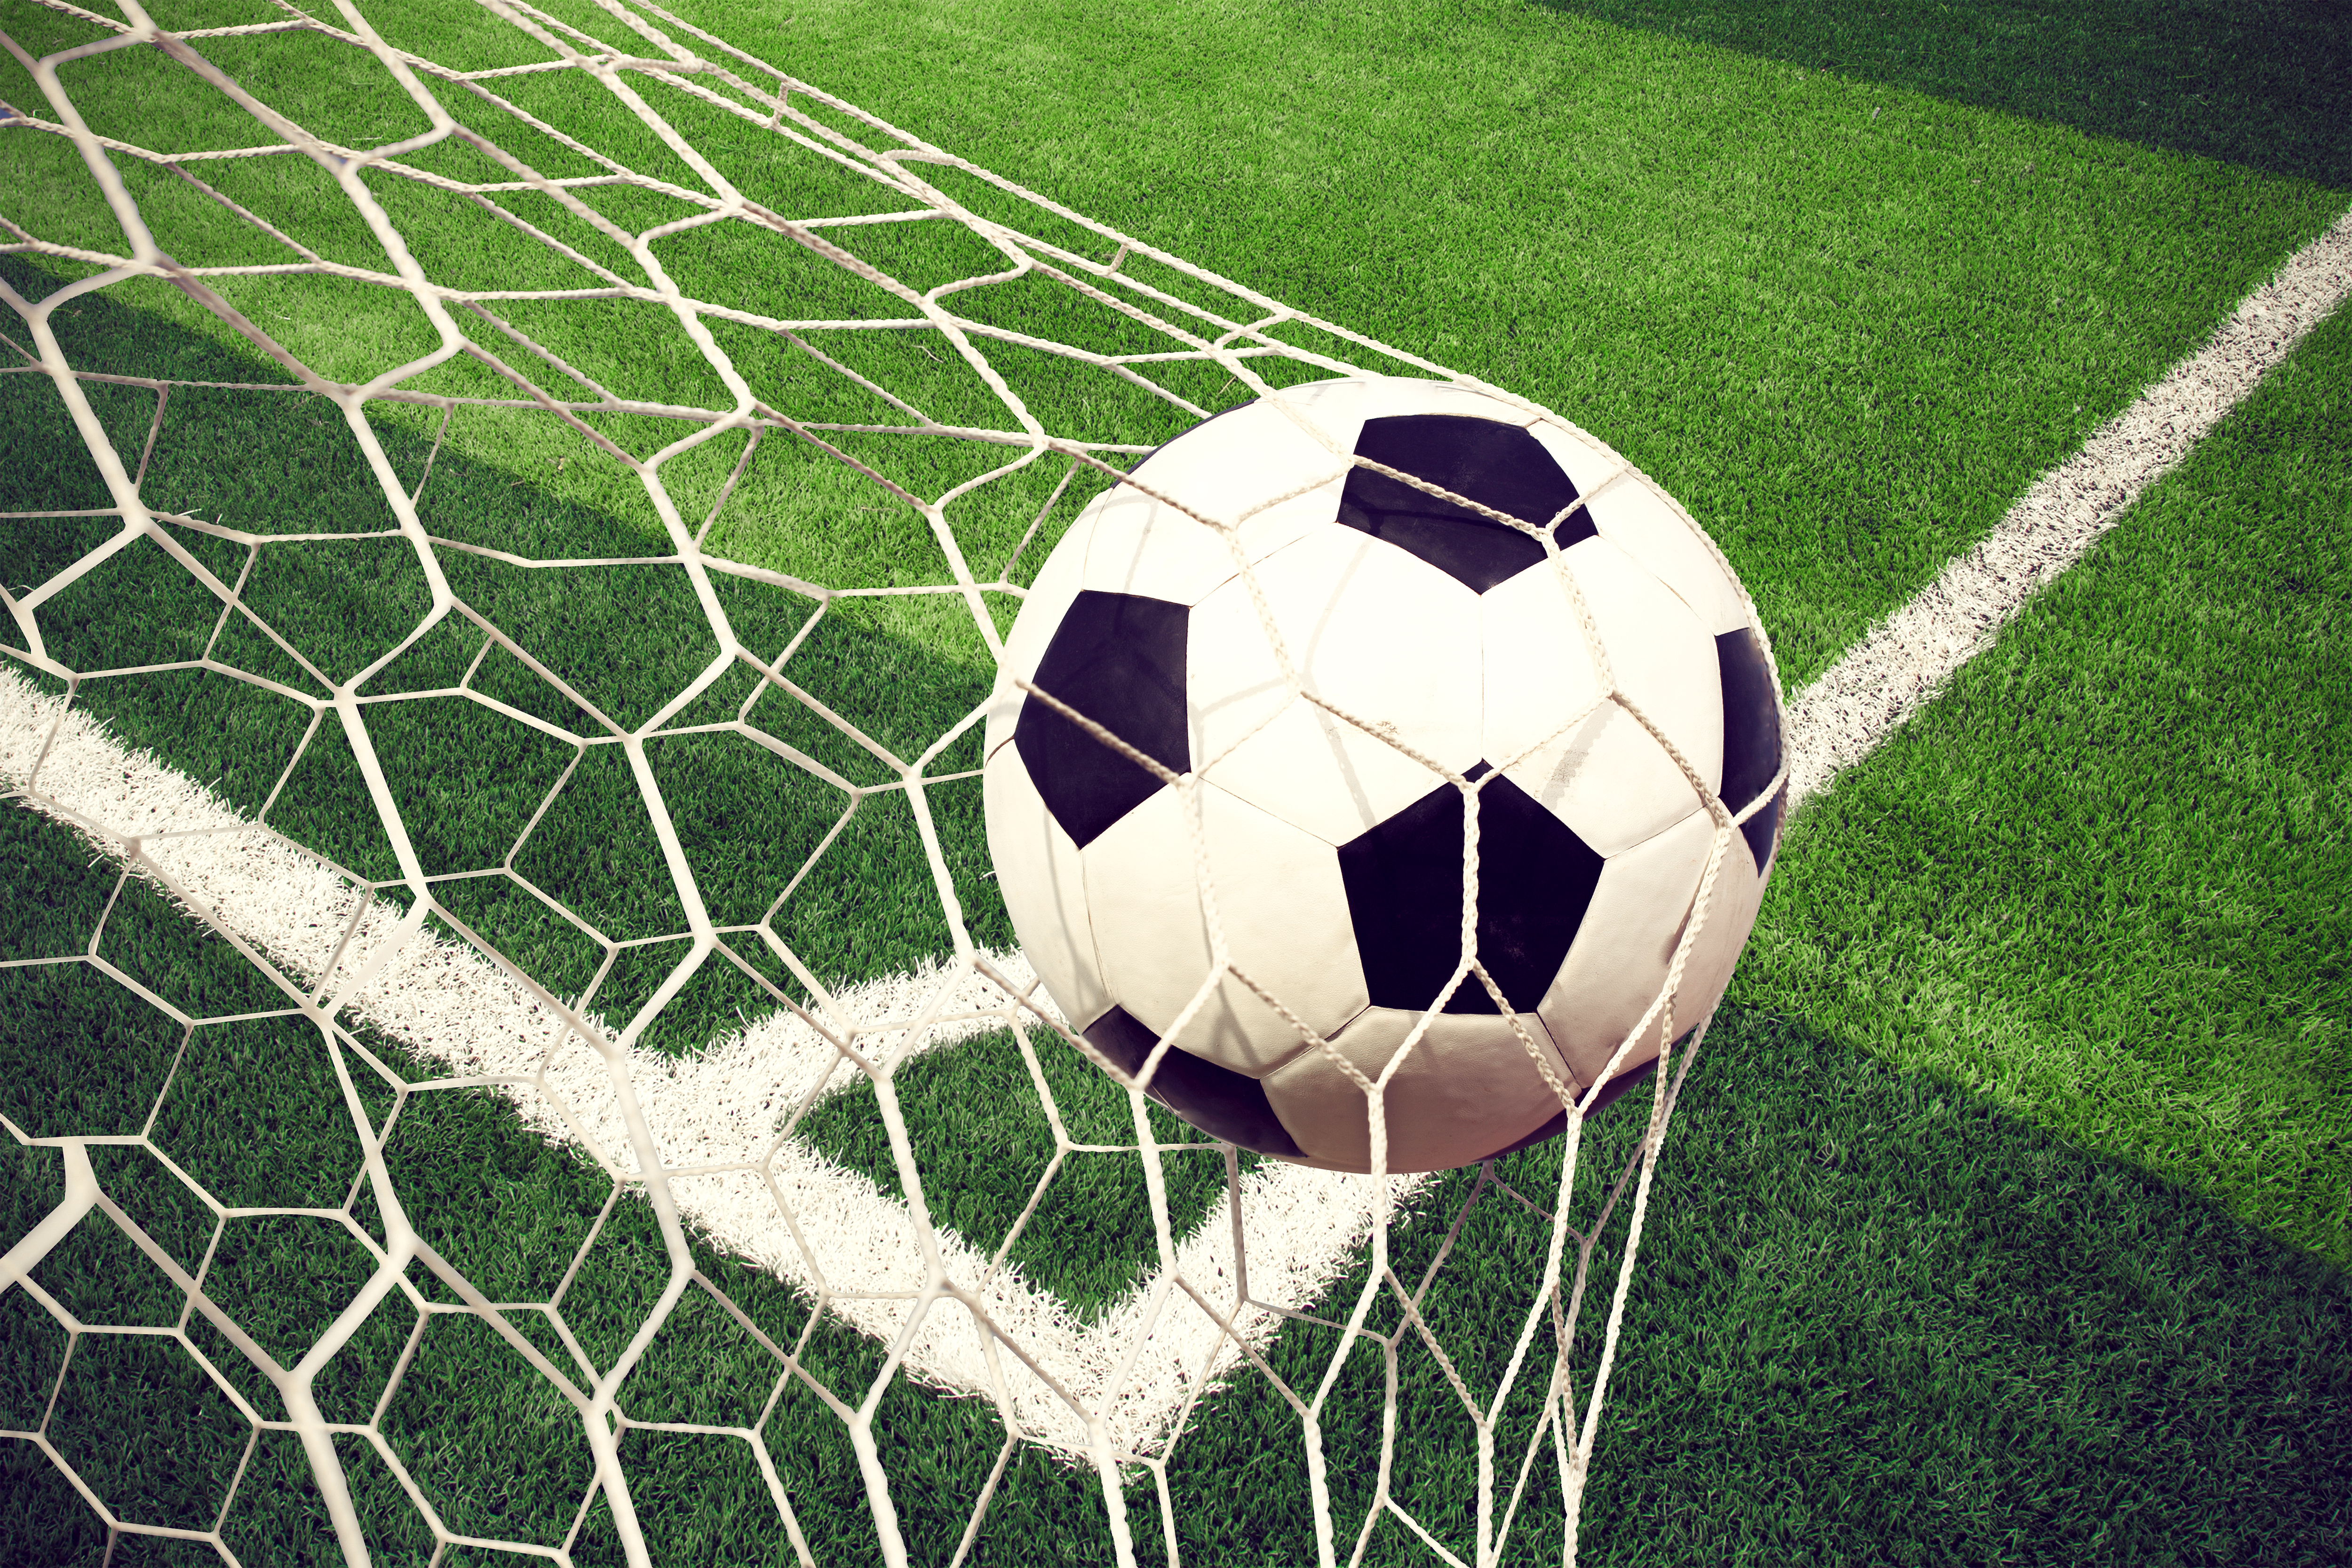 Soccer Goal Background Gallery Yopriceville   High Quality